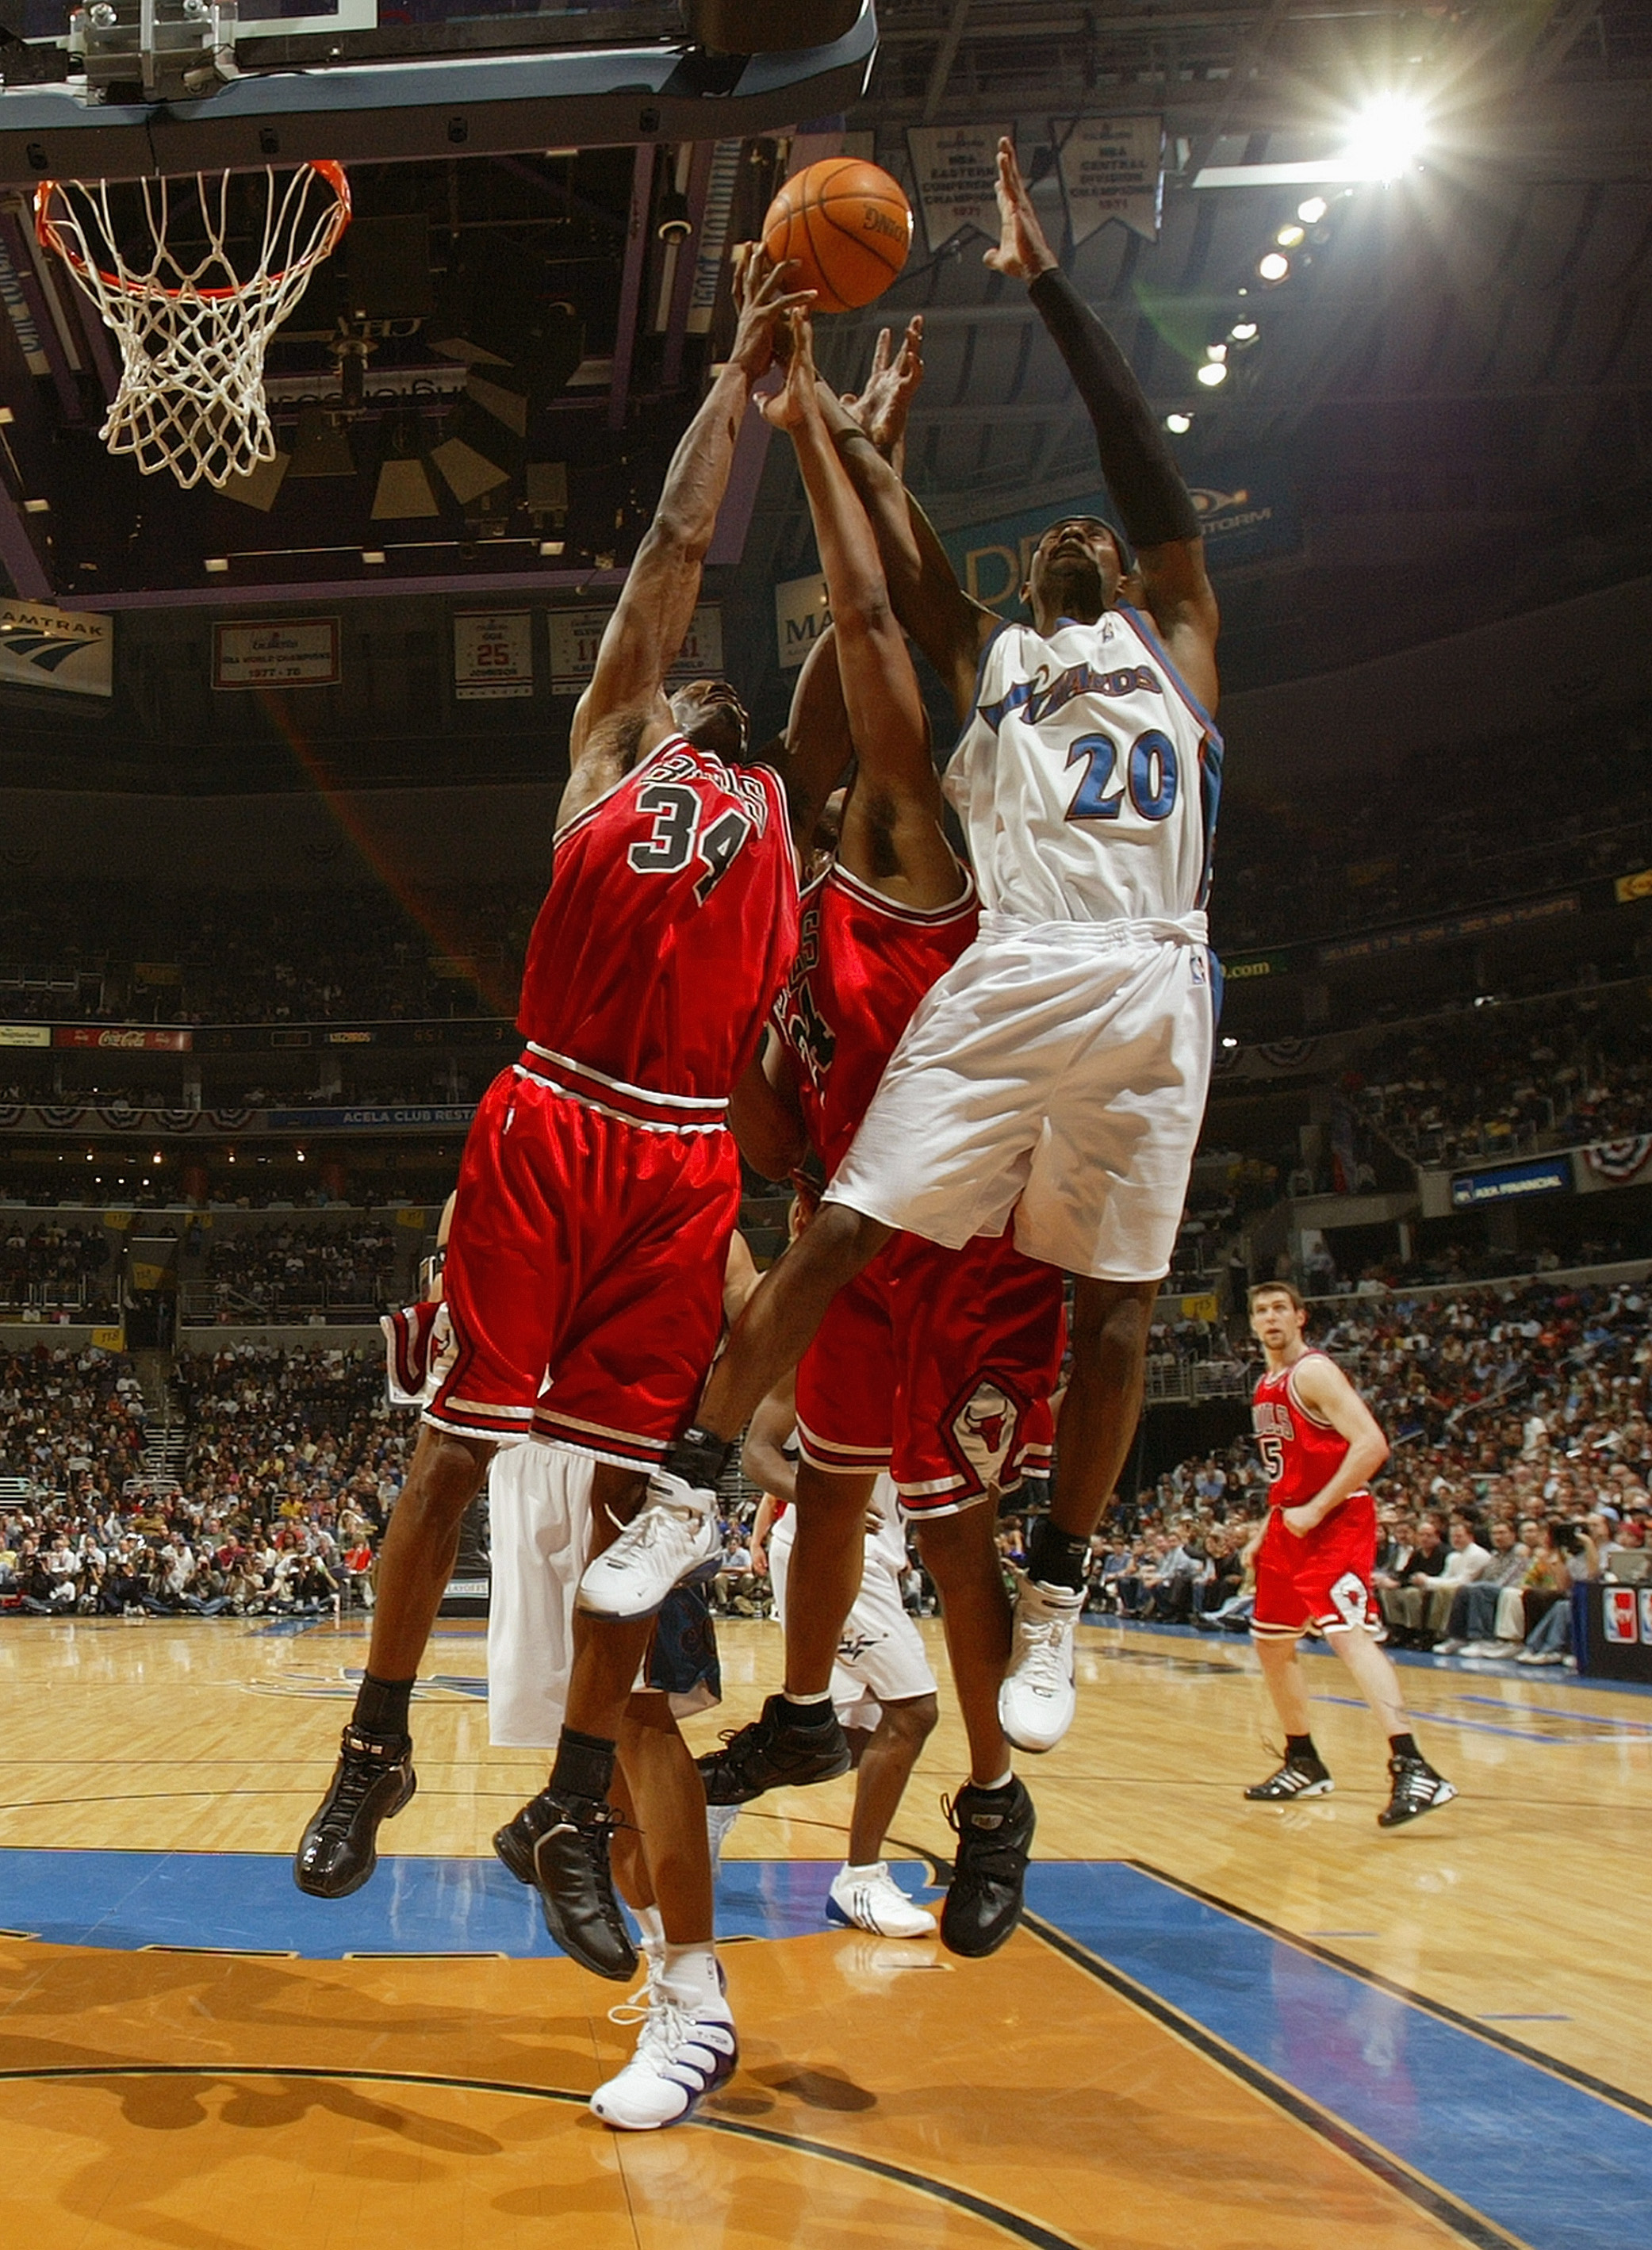 WAHINGTON - MAY 2:  Antonio Davis #34 of the Chicago Bulls rebounds against Larry Hughes #20 of the Washington Wizards in Game four of the Eastern Conference Quarterfinals during 2005 NBA Playoffs on May 2, 2005 at the MCI Center in Washington D.C. The Wi